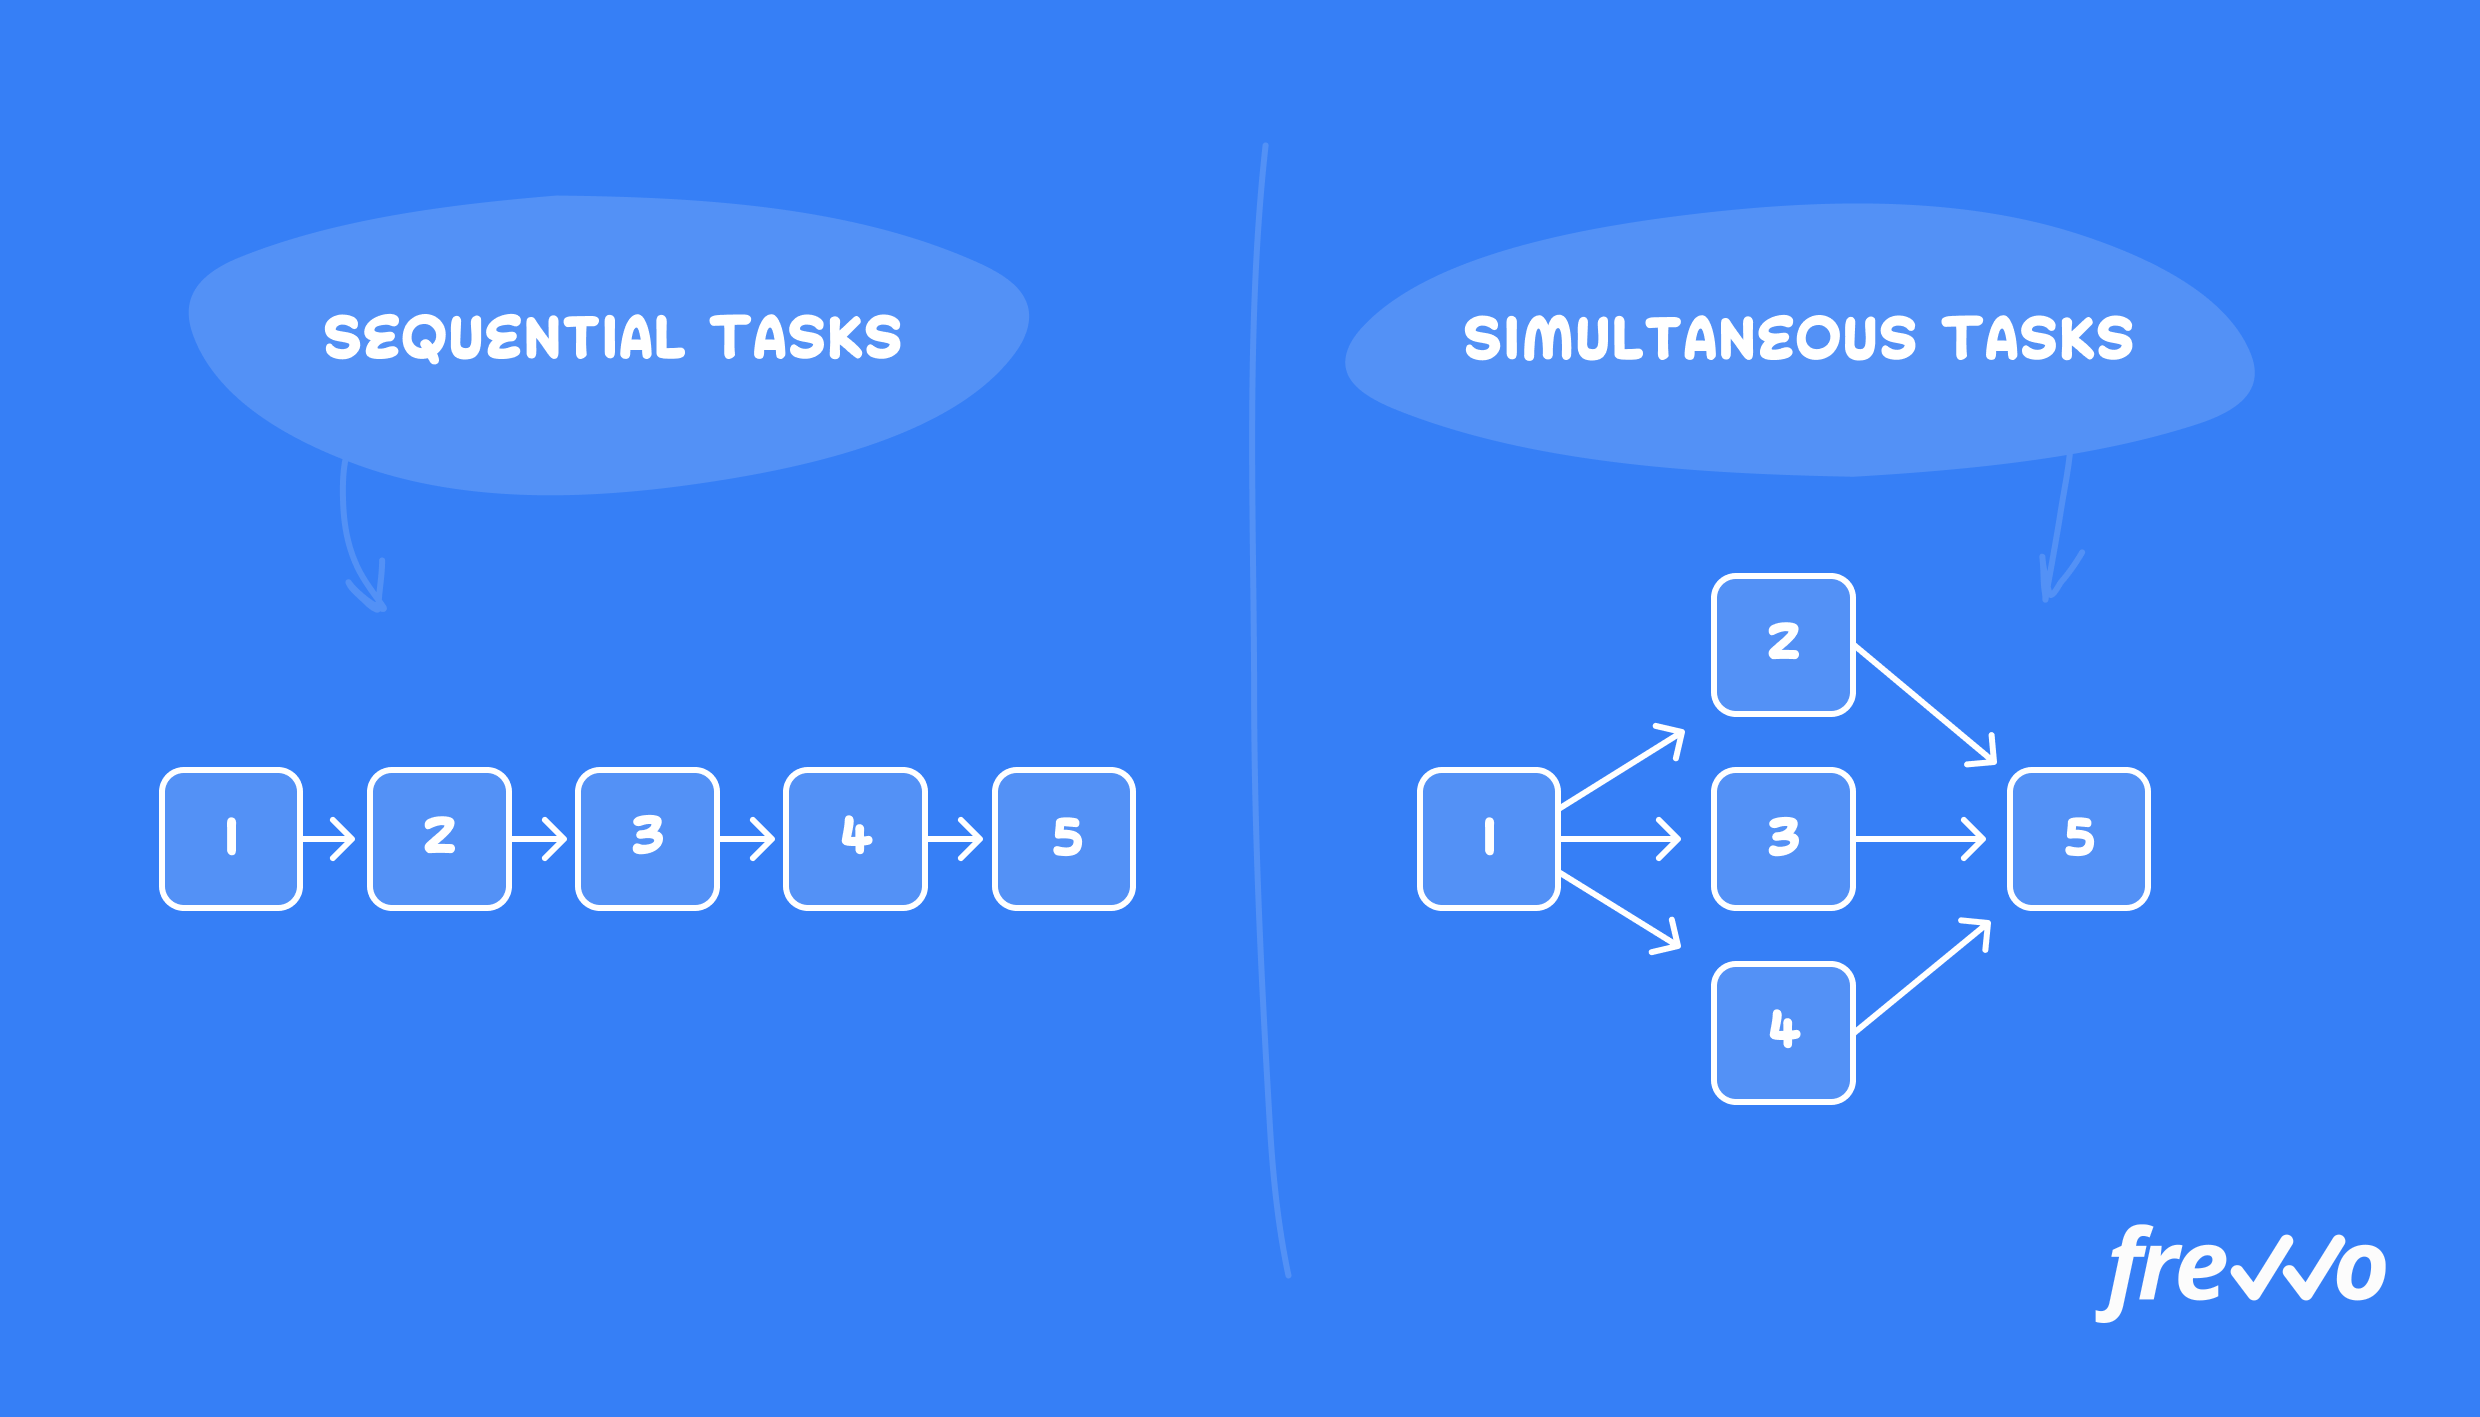 Distinguishing between sequential and simultaneous tasks